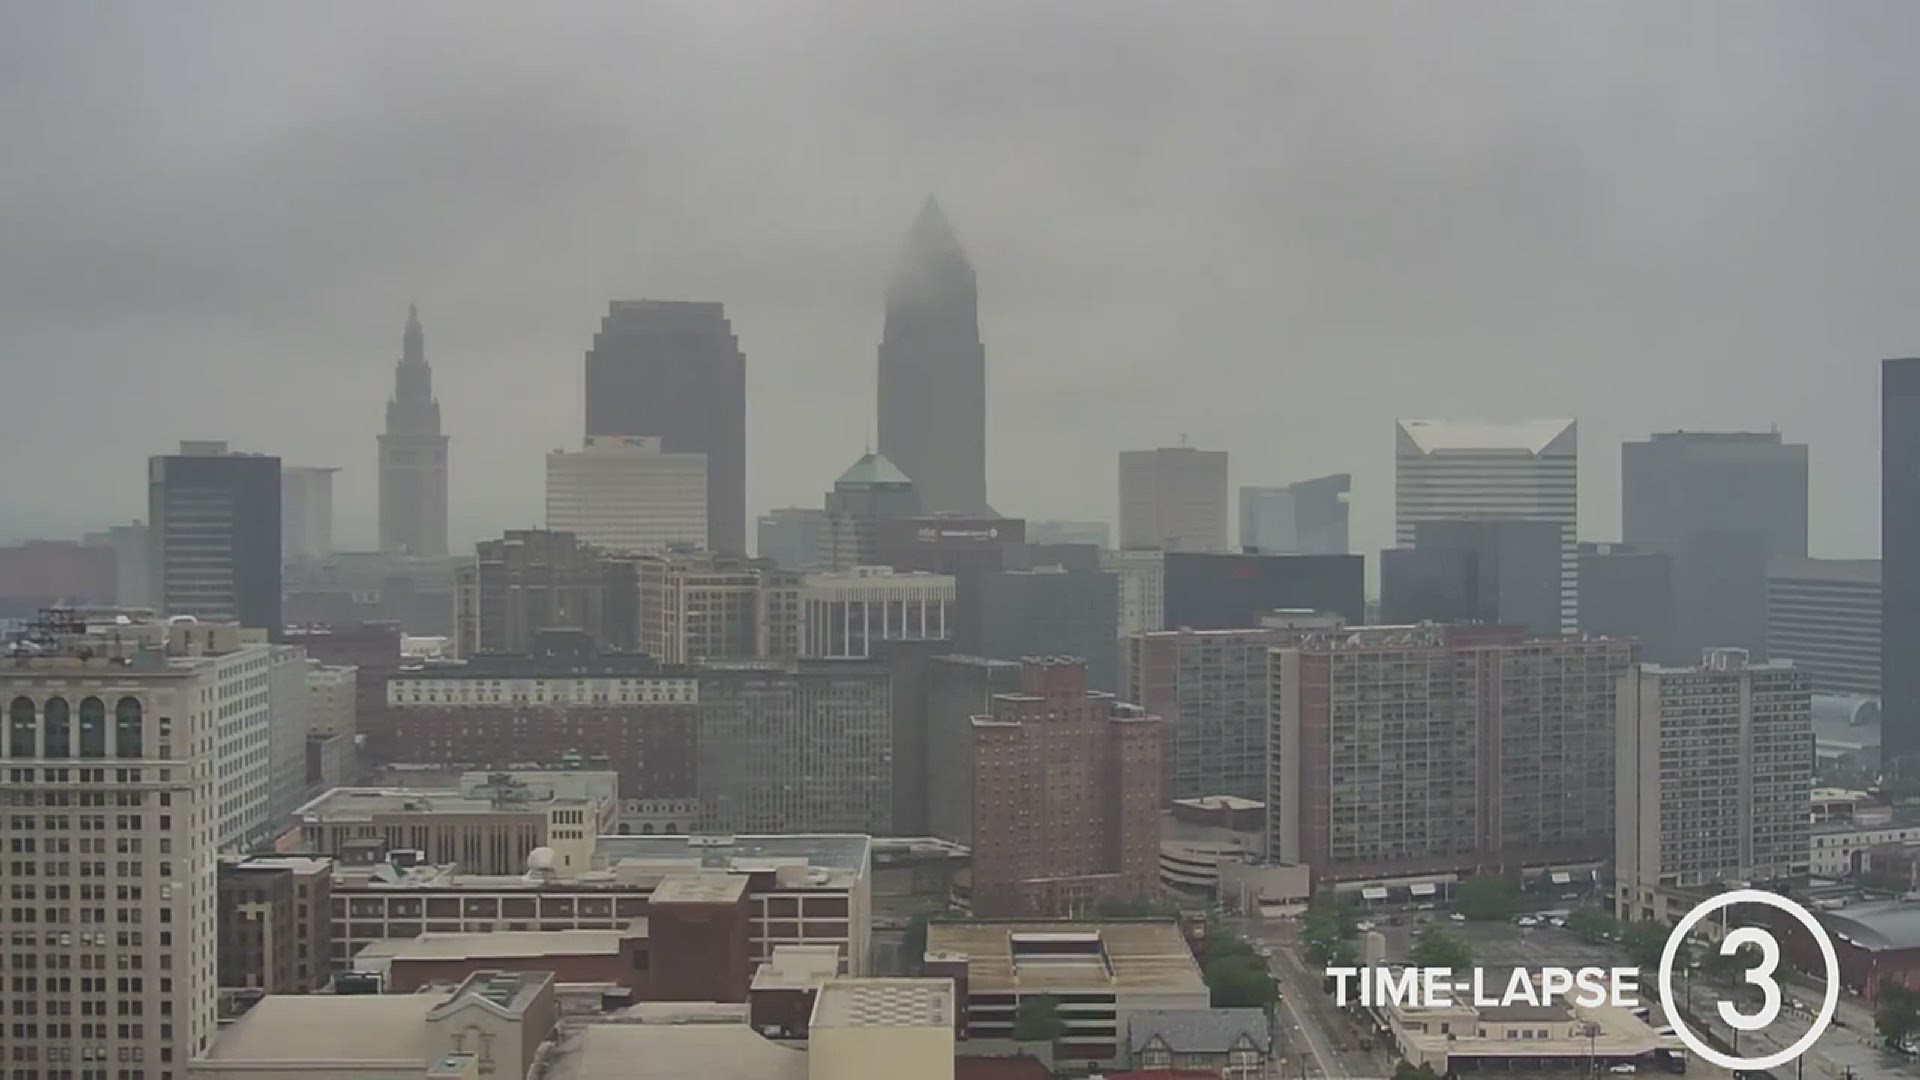 Check out our Sunday weather time-lapse from the WKYC Studios CSU Cam... Lots of rain, but a few rays of sunshine in there too later in the day. #3weather